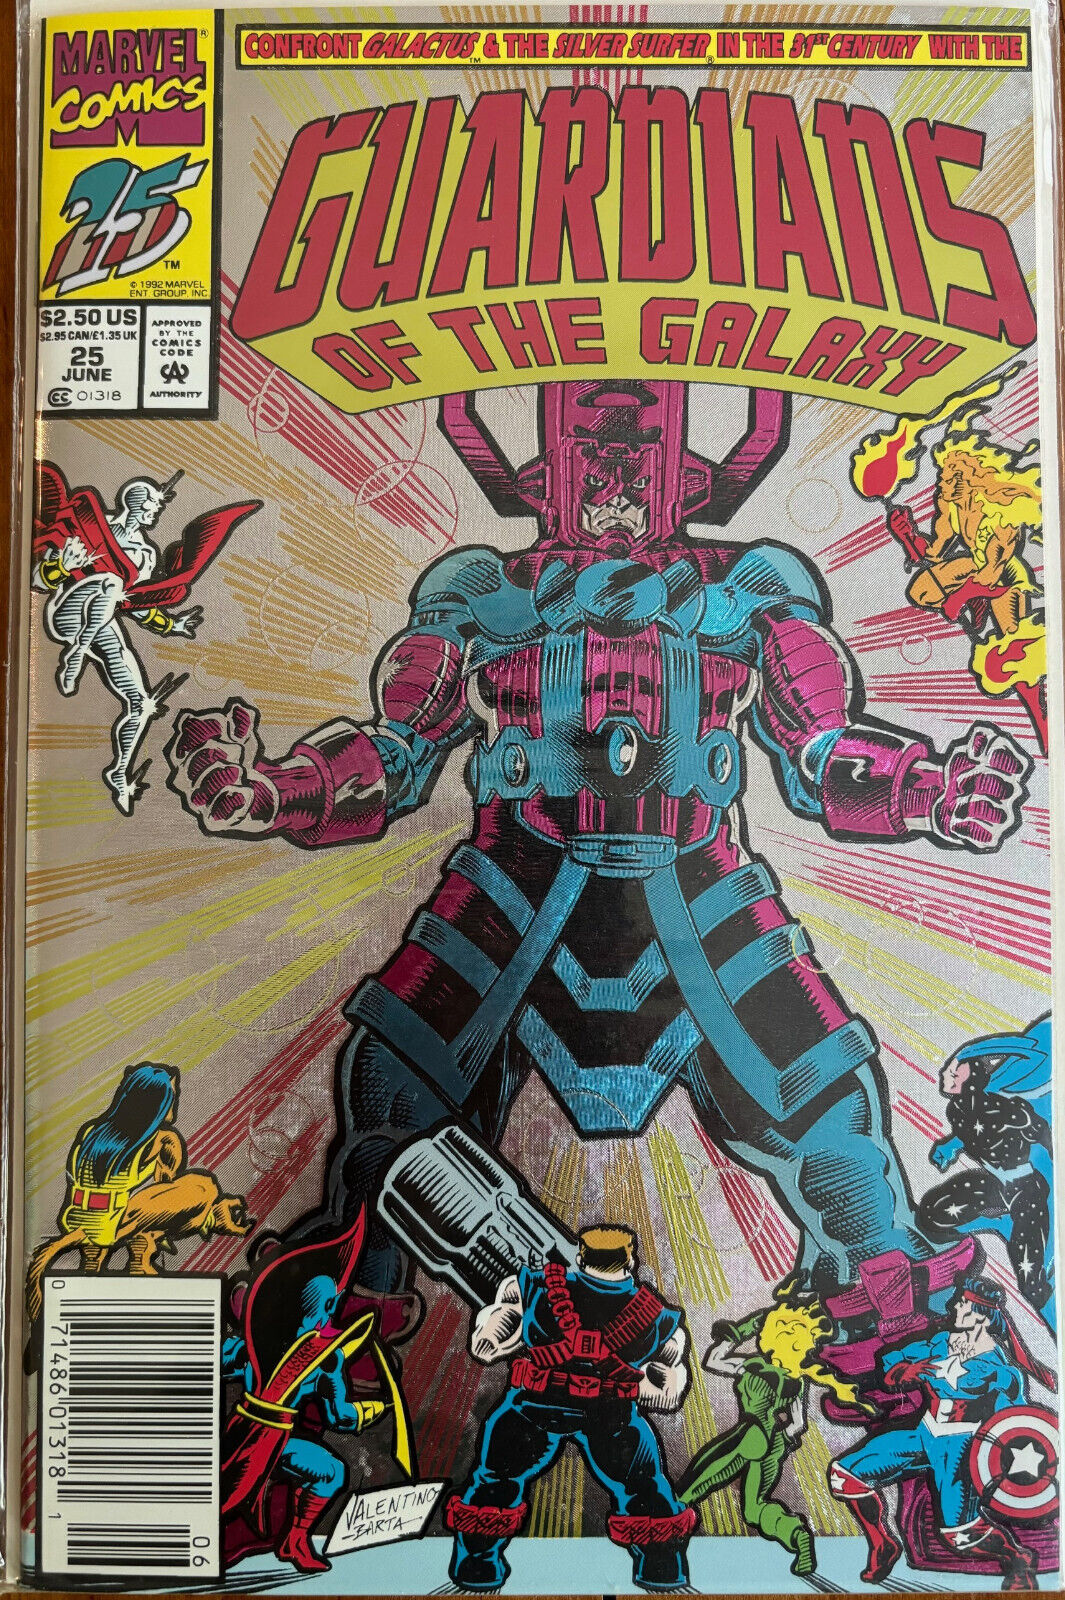 GUARDIANS OF THE GALAXY, MARVEL COMICS #25 (Qty. 3 Total) VERY GOOD